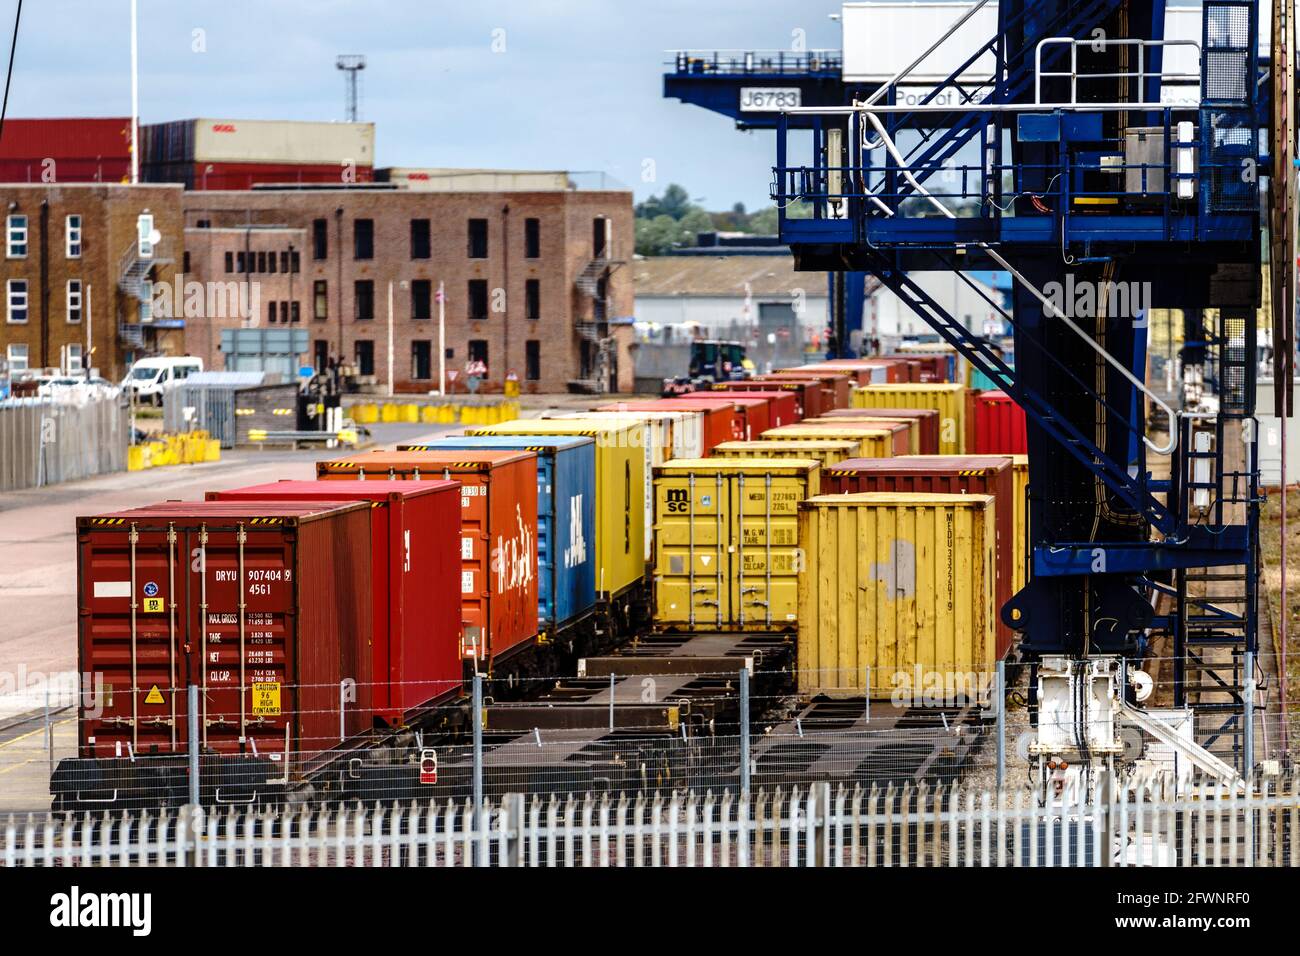 UK Shipping Container rail freight - intermodal shipping containers being loaded onto trains for onward transport from the Port of Felixstowe, UK Stock Photo